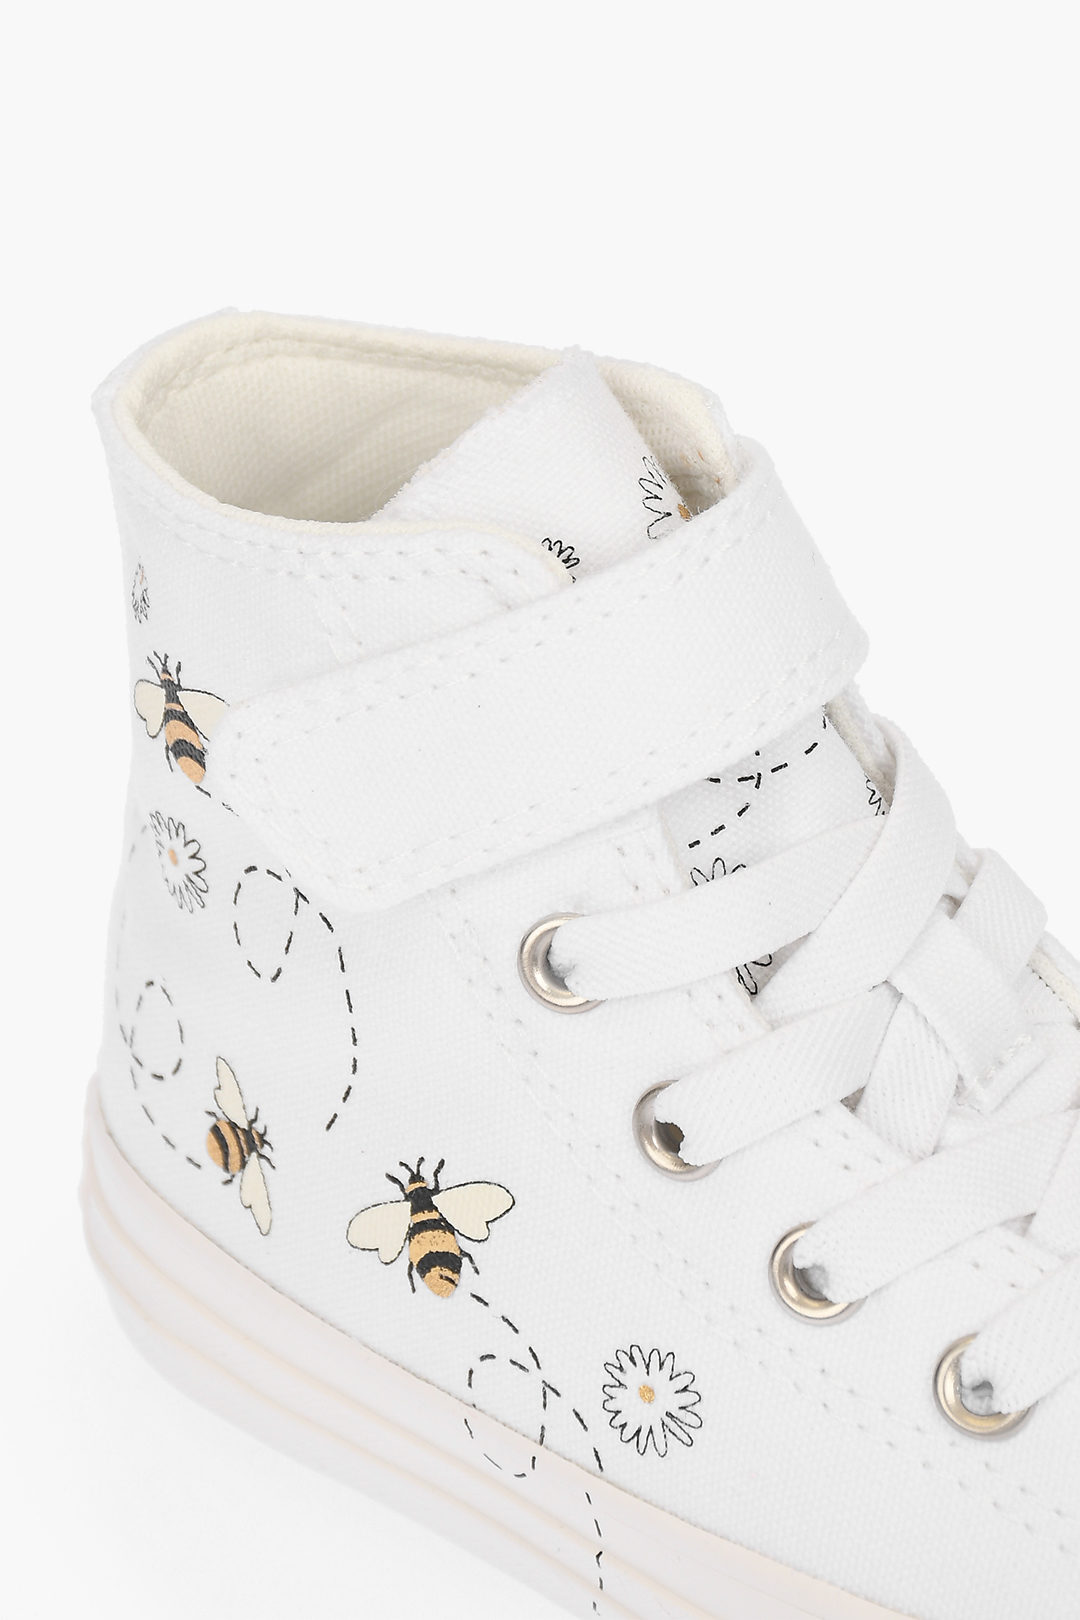 Converse Chuck Taylor Light Weight Canvas Shoes For Women - Buy Black Color  Converse Chuck Taylor Light Weight Canvas Shoes For Women Online at Best  Price - Shop Online for Footwears in